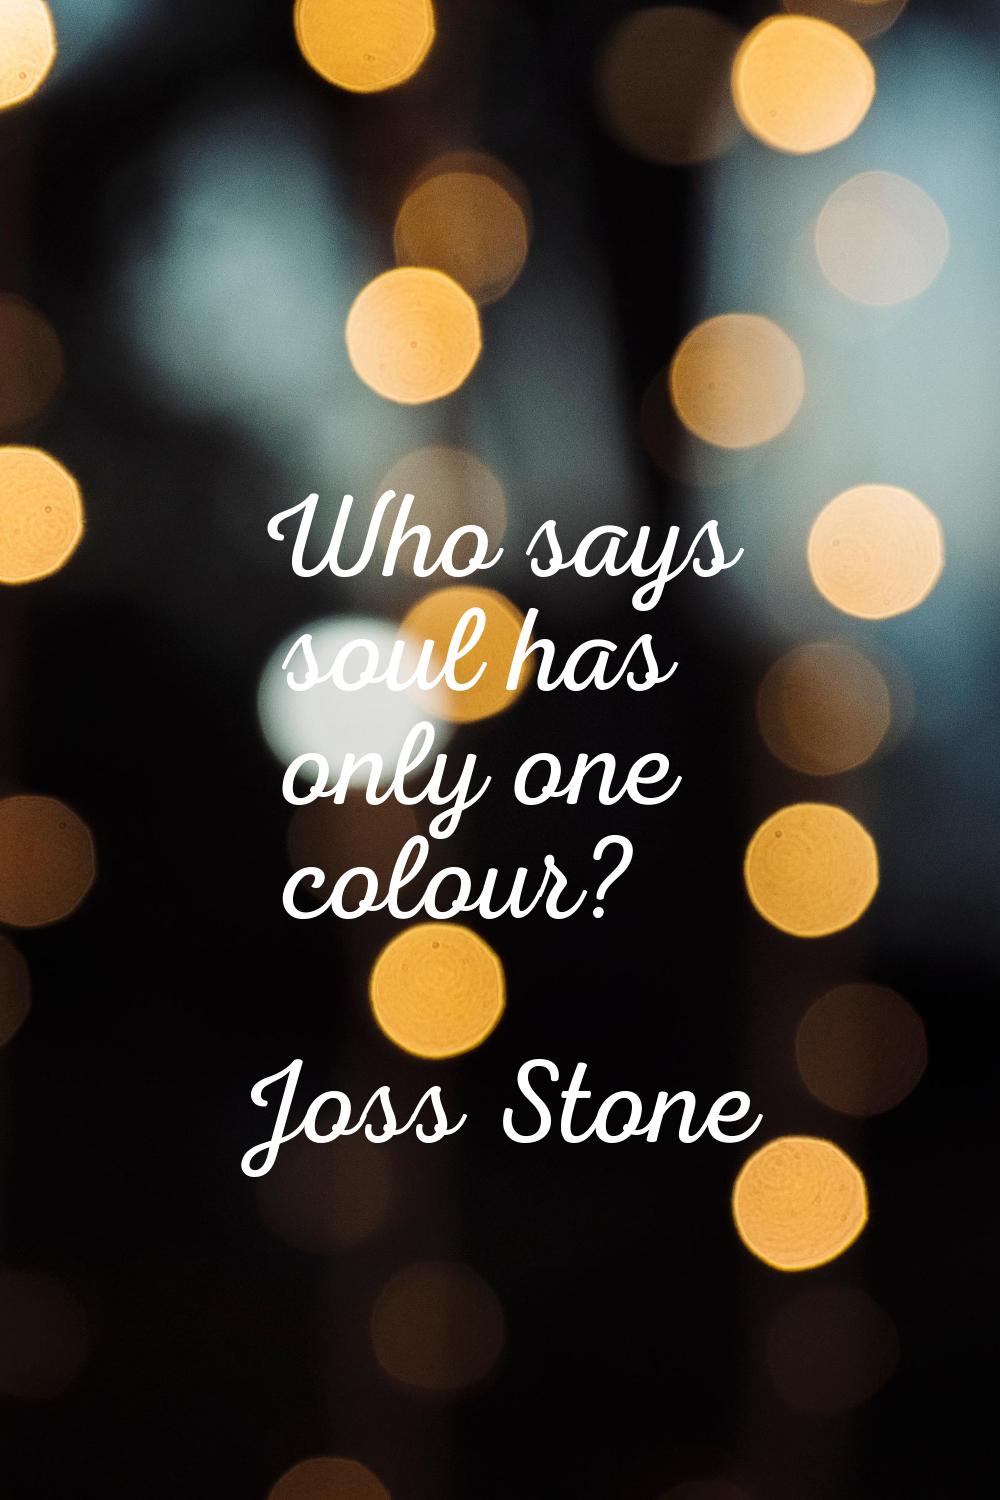 Who says soul has only one colour?